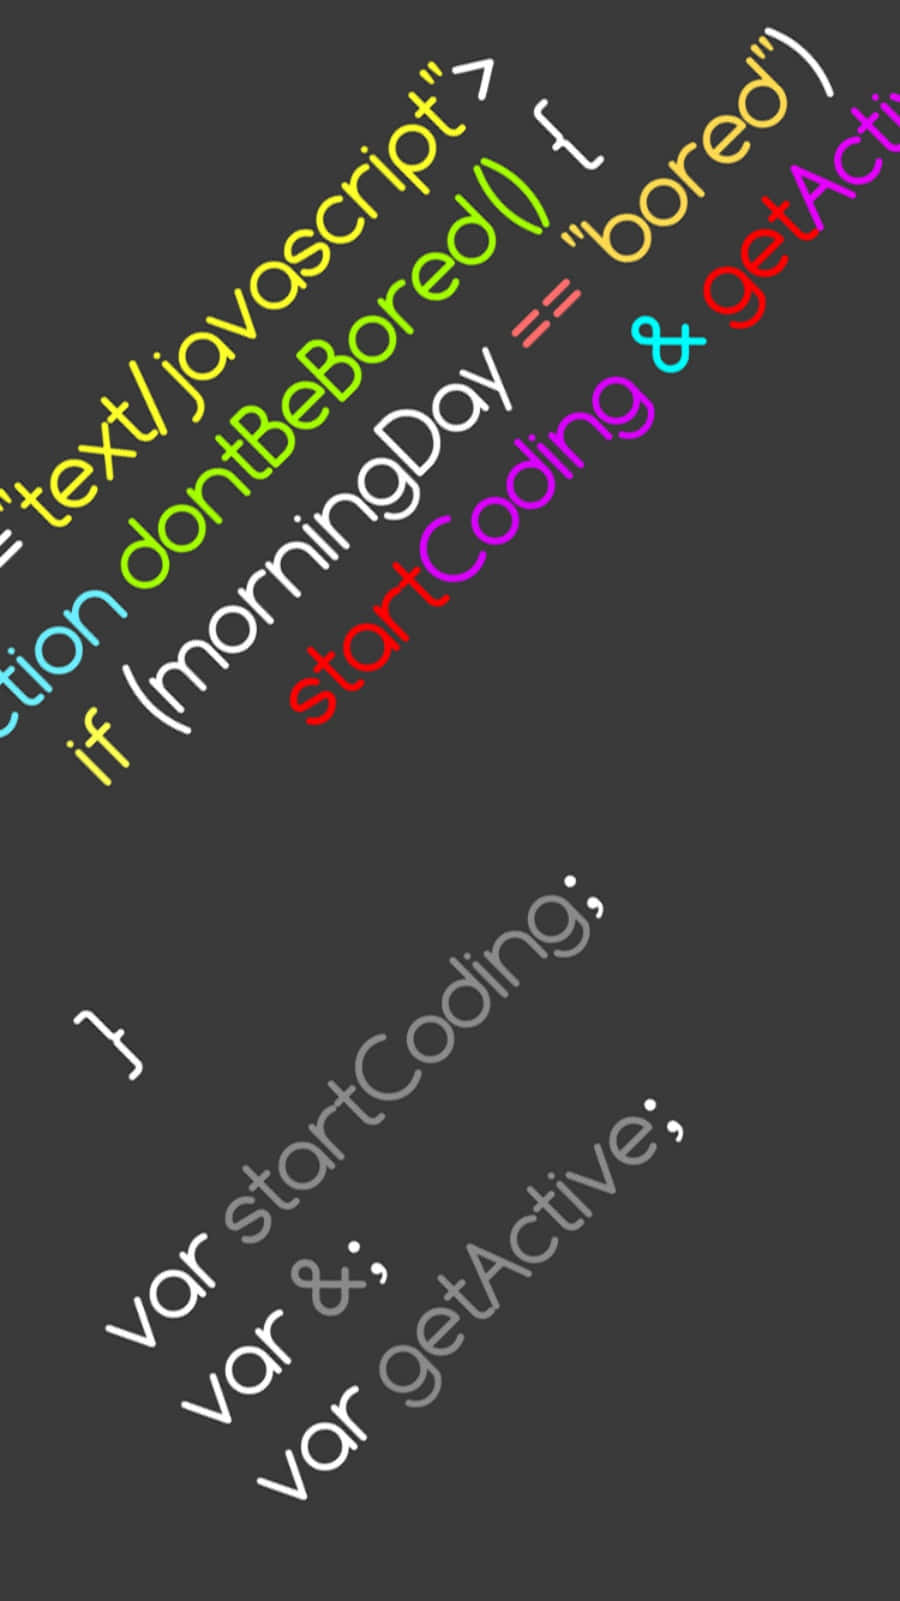 Iphone coding - Make your app idea a reality Wallpaper